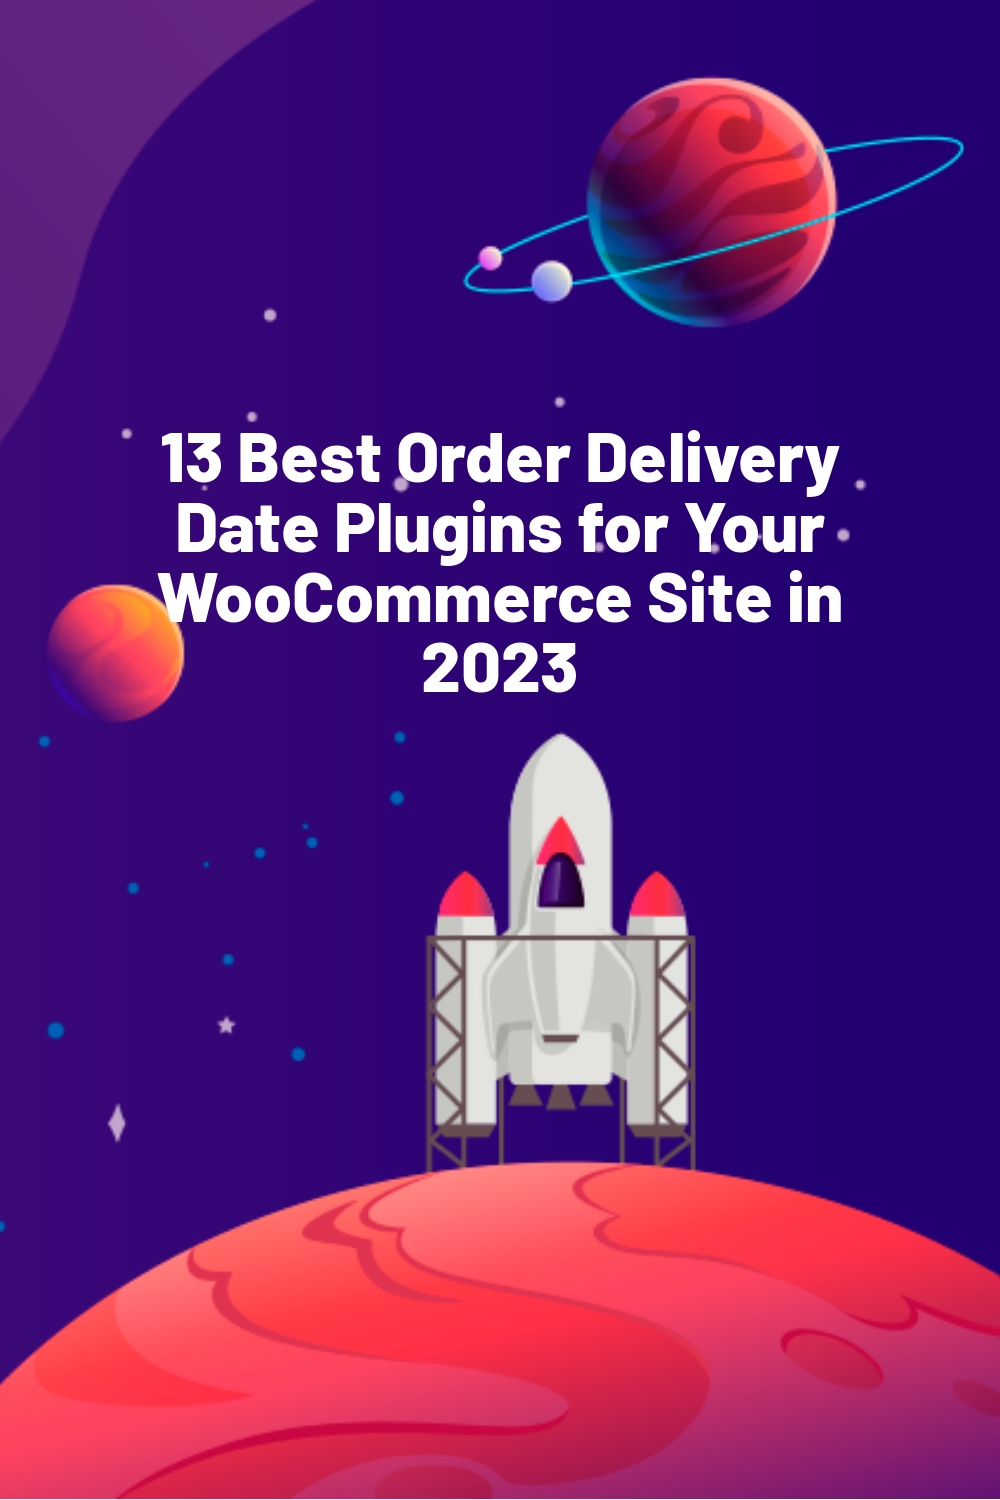 13 Best Order Delivery Date Plugins for Your WooCommerce Site in 2023